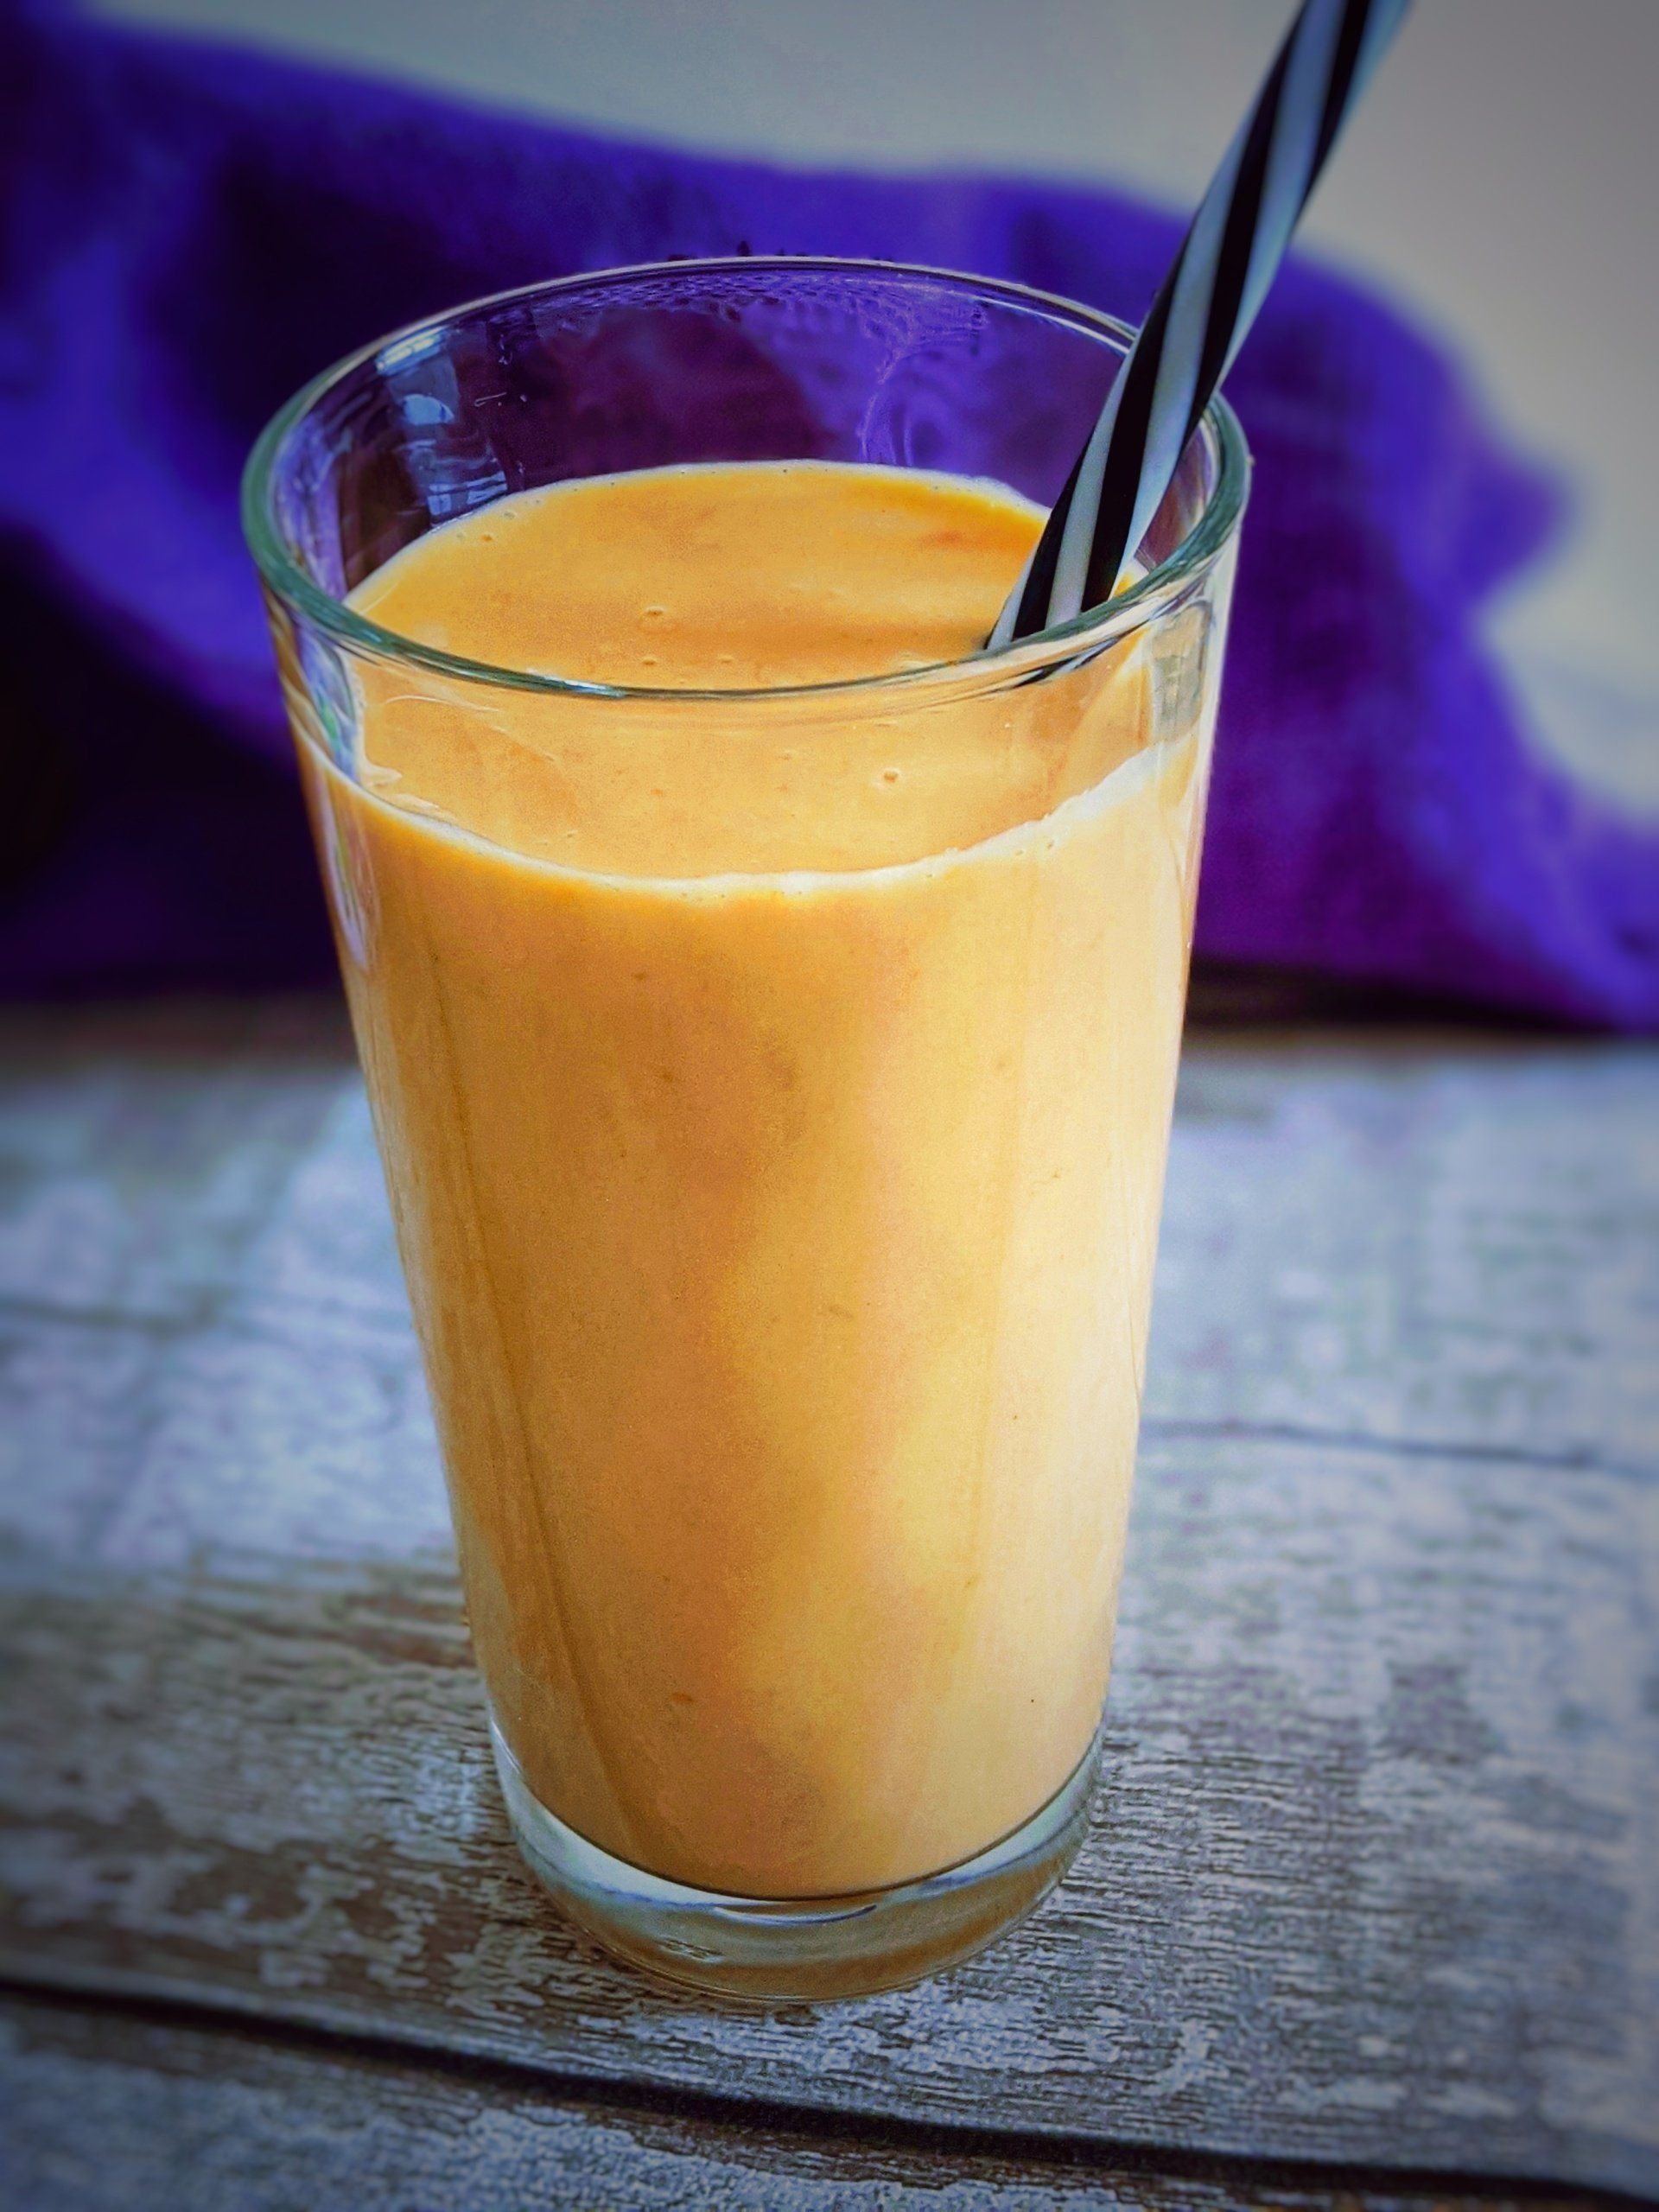 Mango and Turmeric Protein Smoothie (vegan, gluten free, wheat free and refined sugar free)